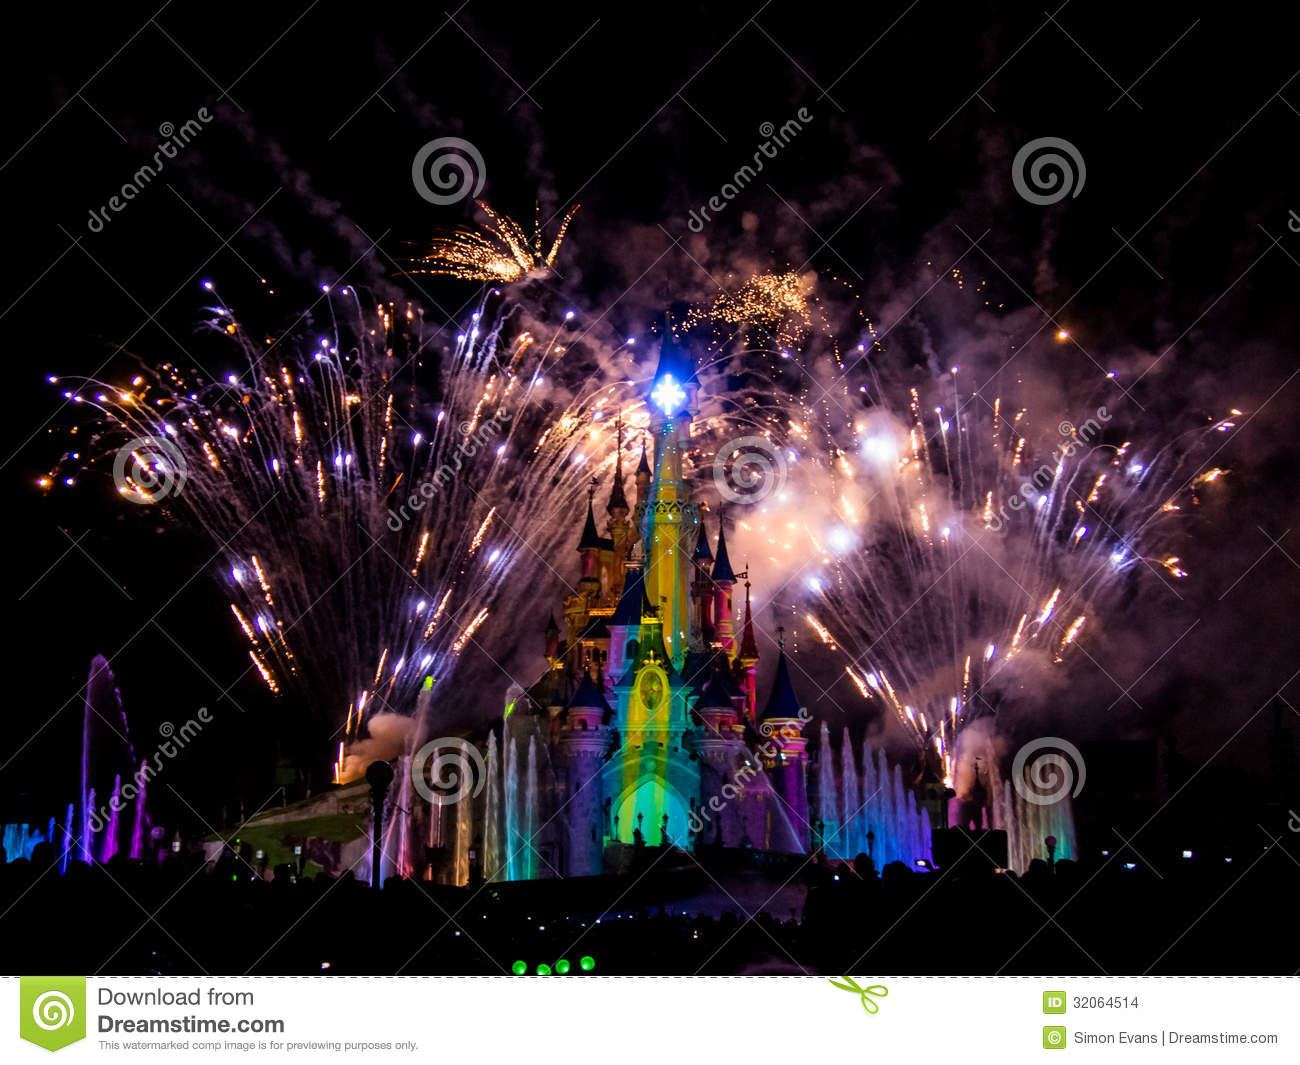 Sleeping Beauty Castle Clipart   Animated Movies Review